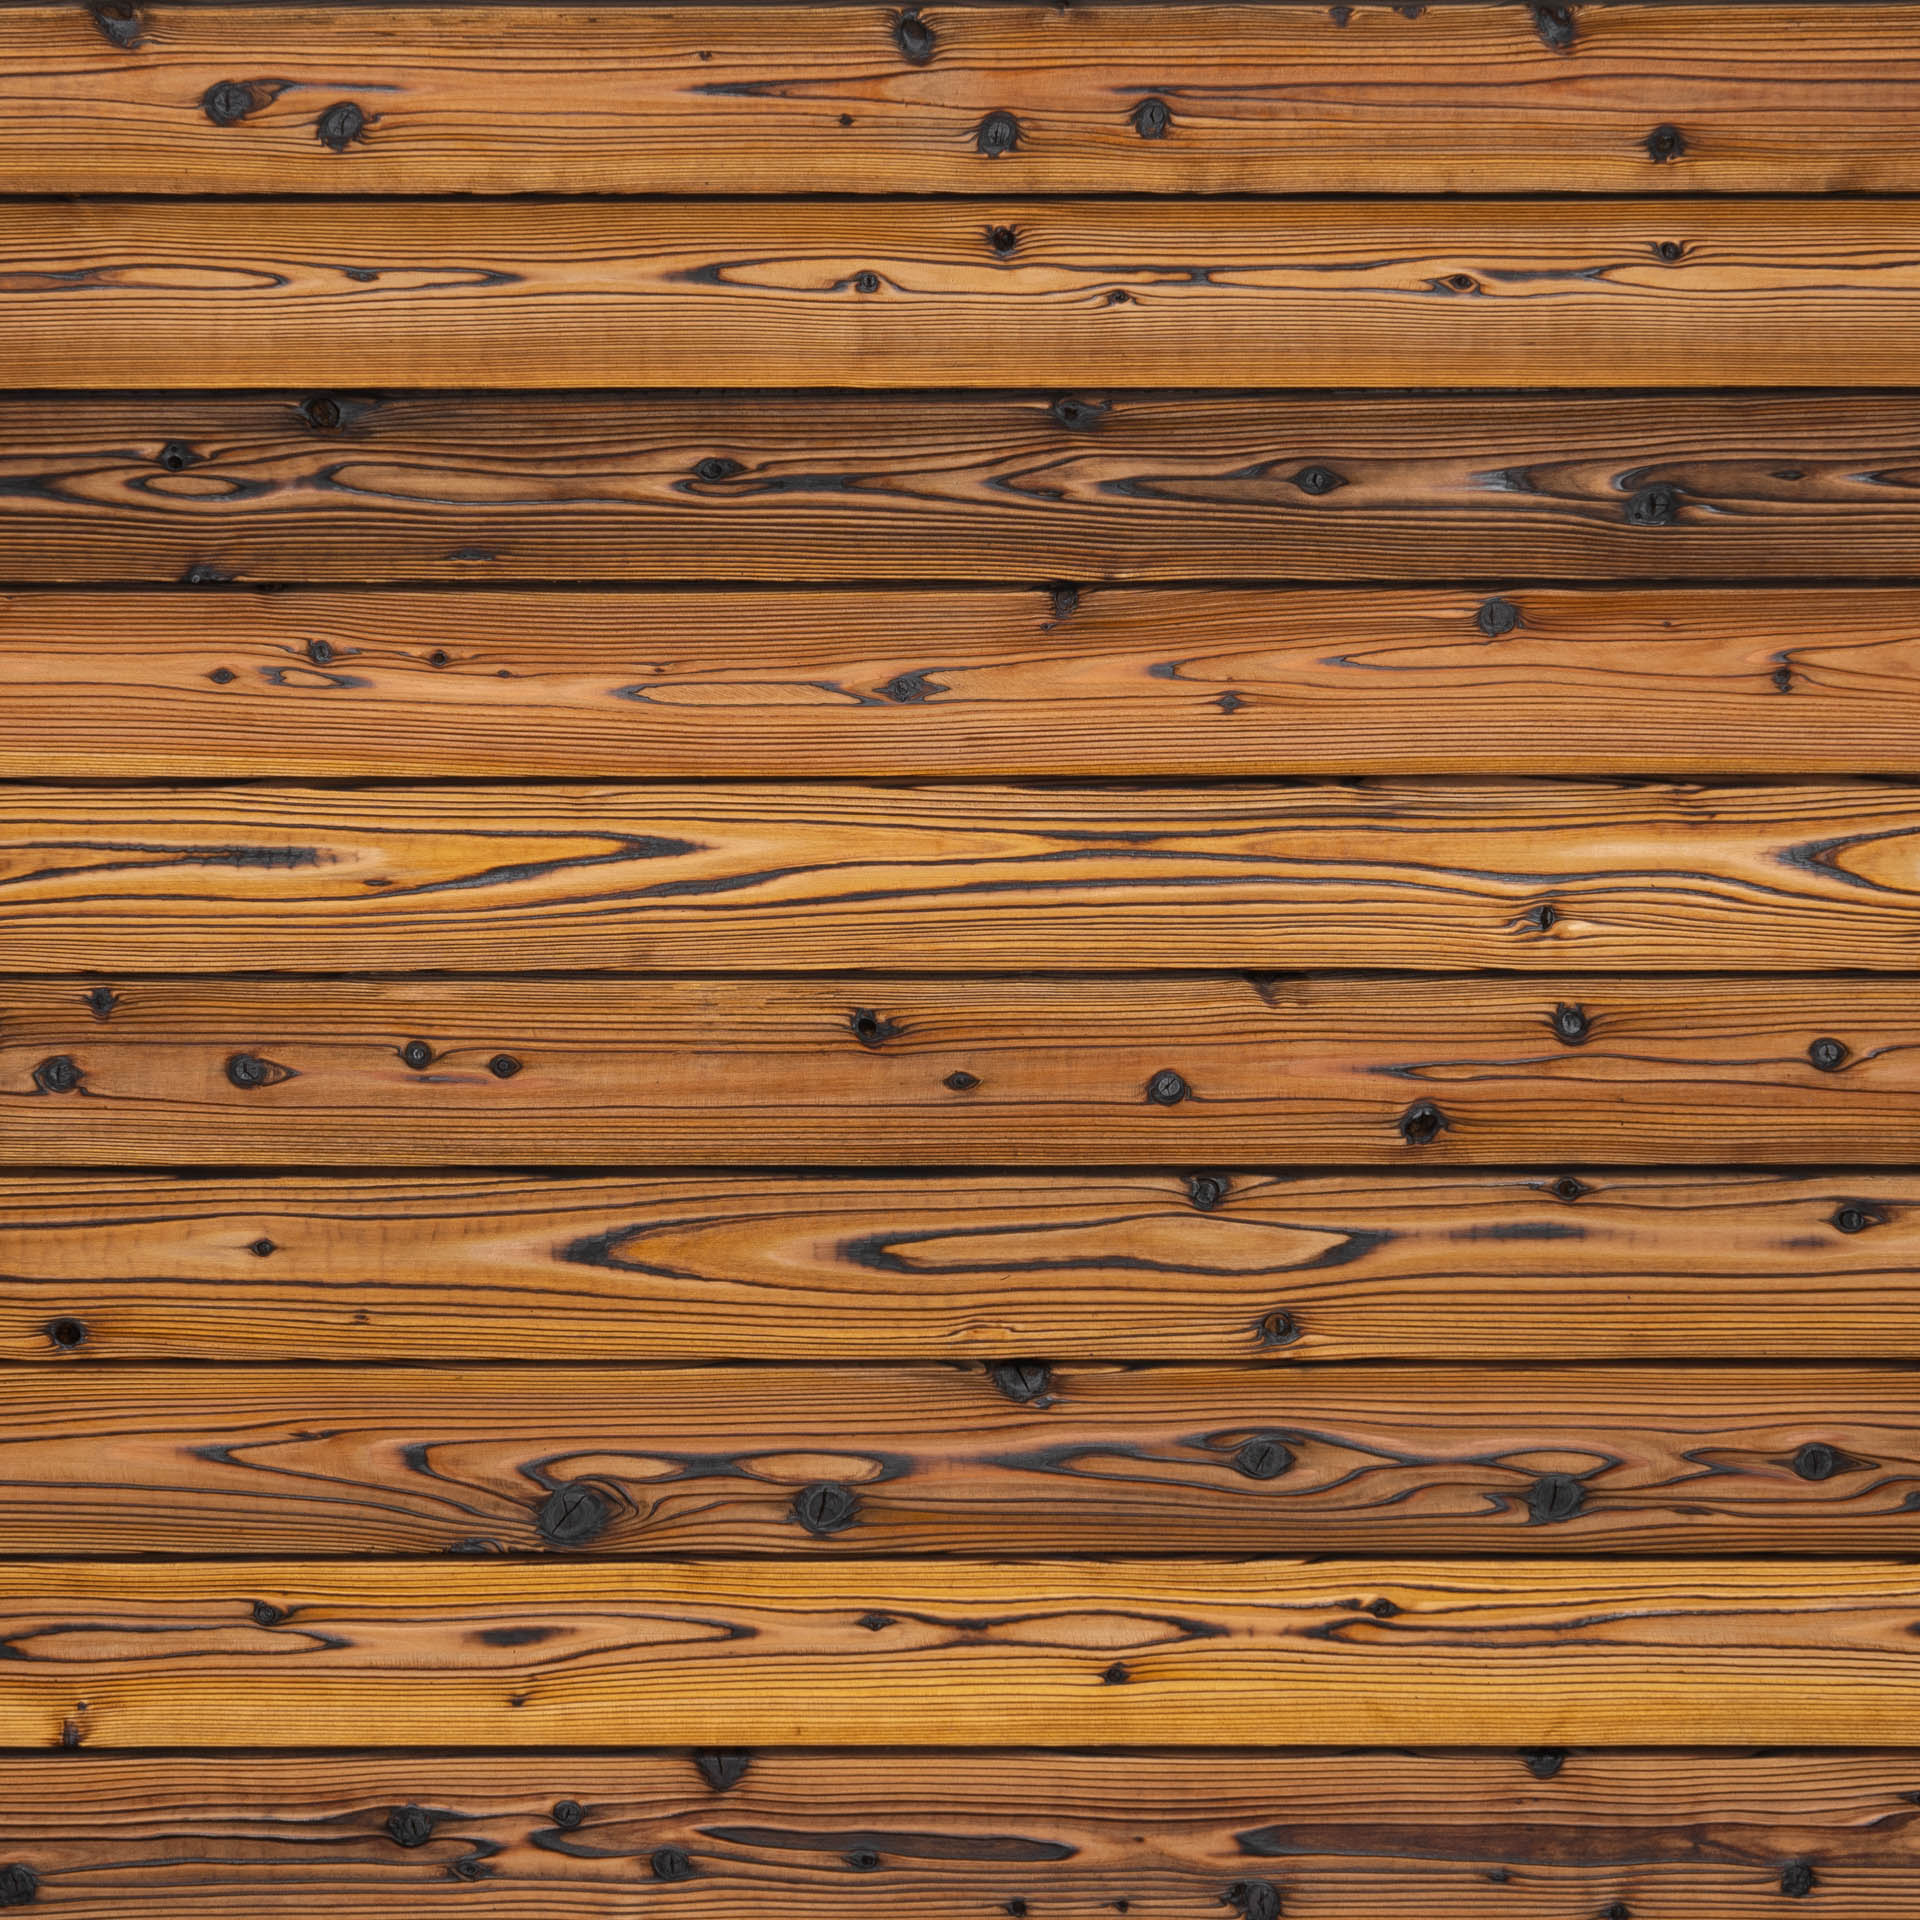 How To Use Linseed Oil - Learn More About this Natural and Inexpensive Wood  Finishing